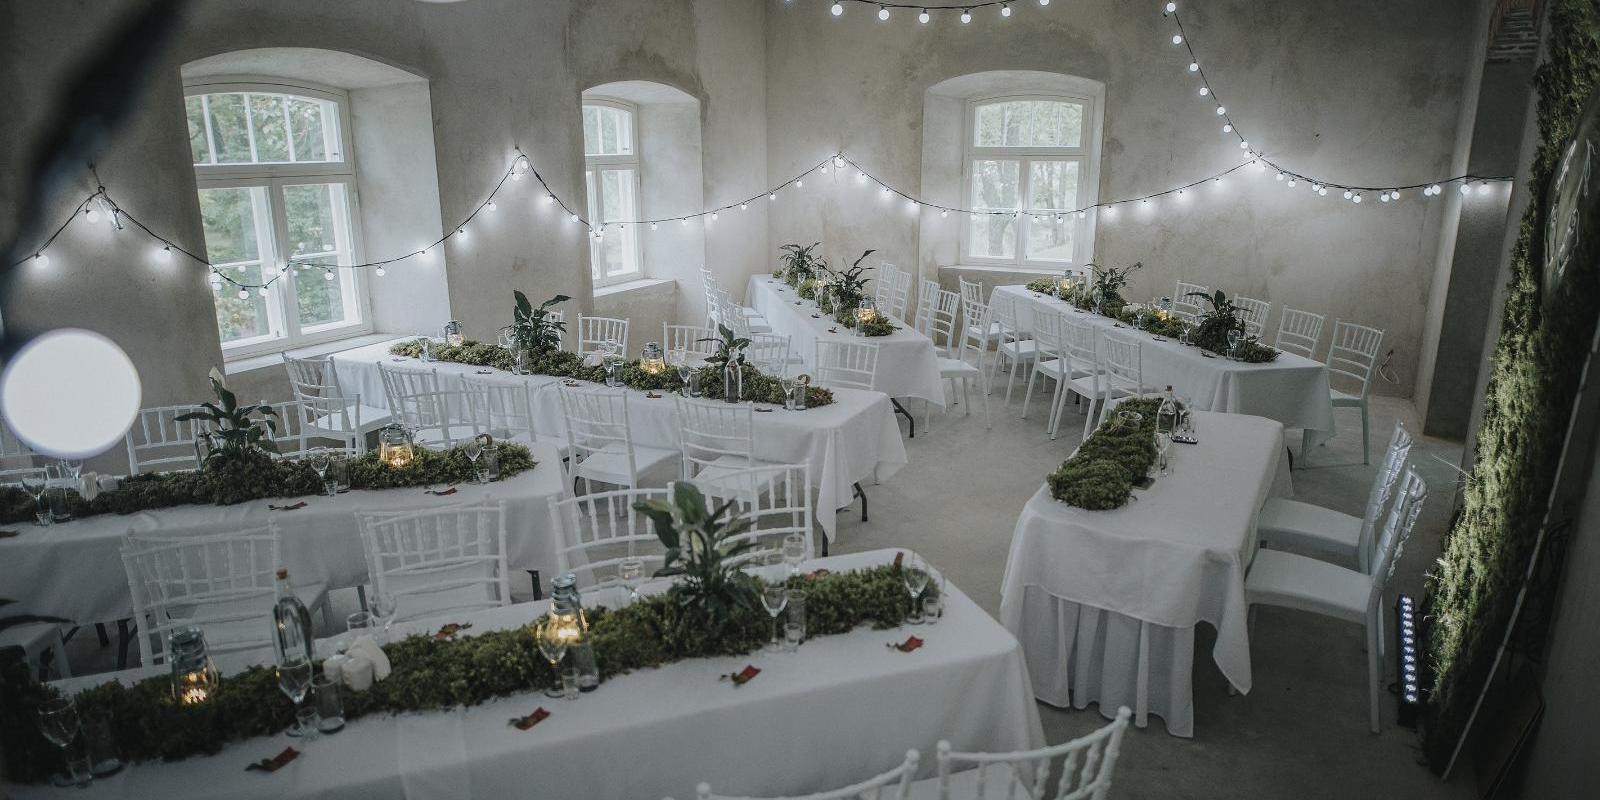 Festive wedding atmosphere of Luke Manor, decorated tables waiting for the party